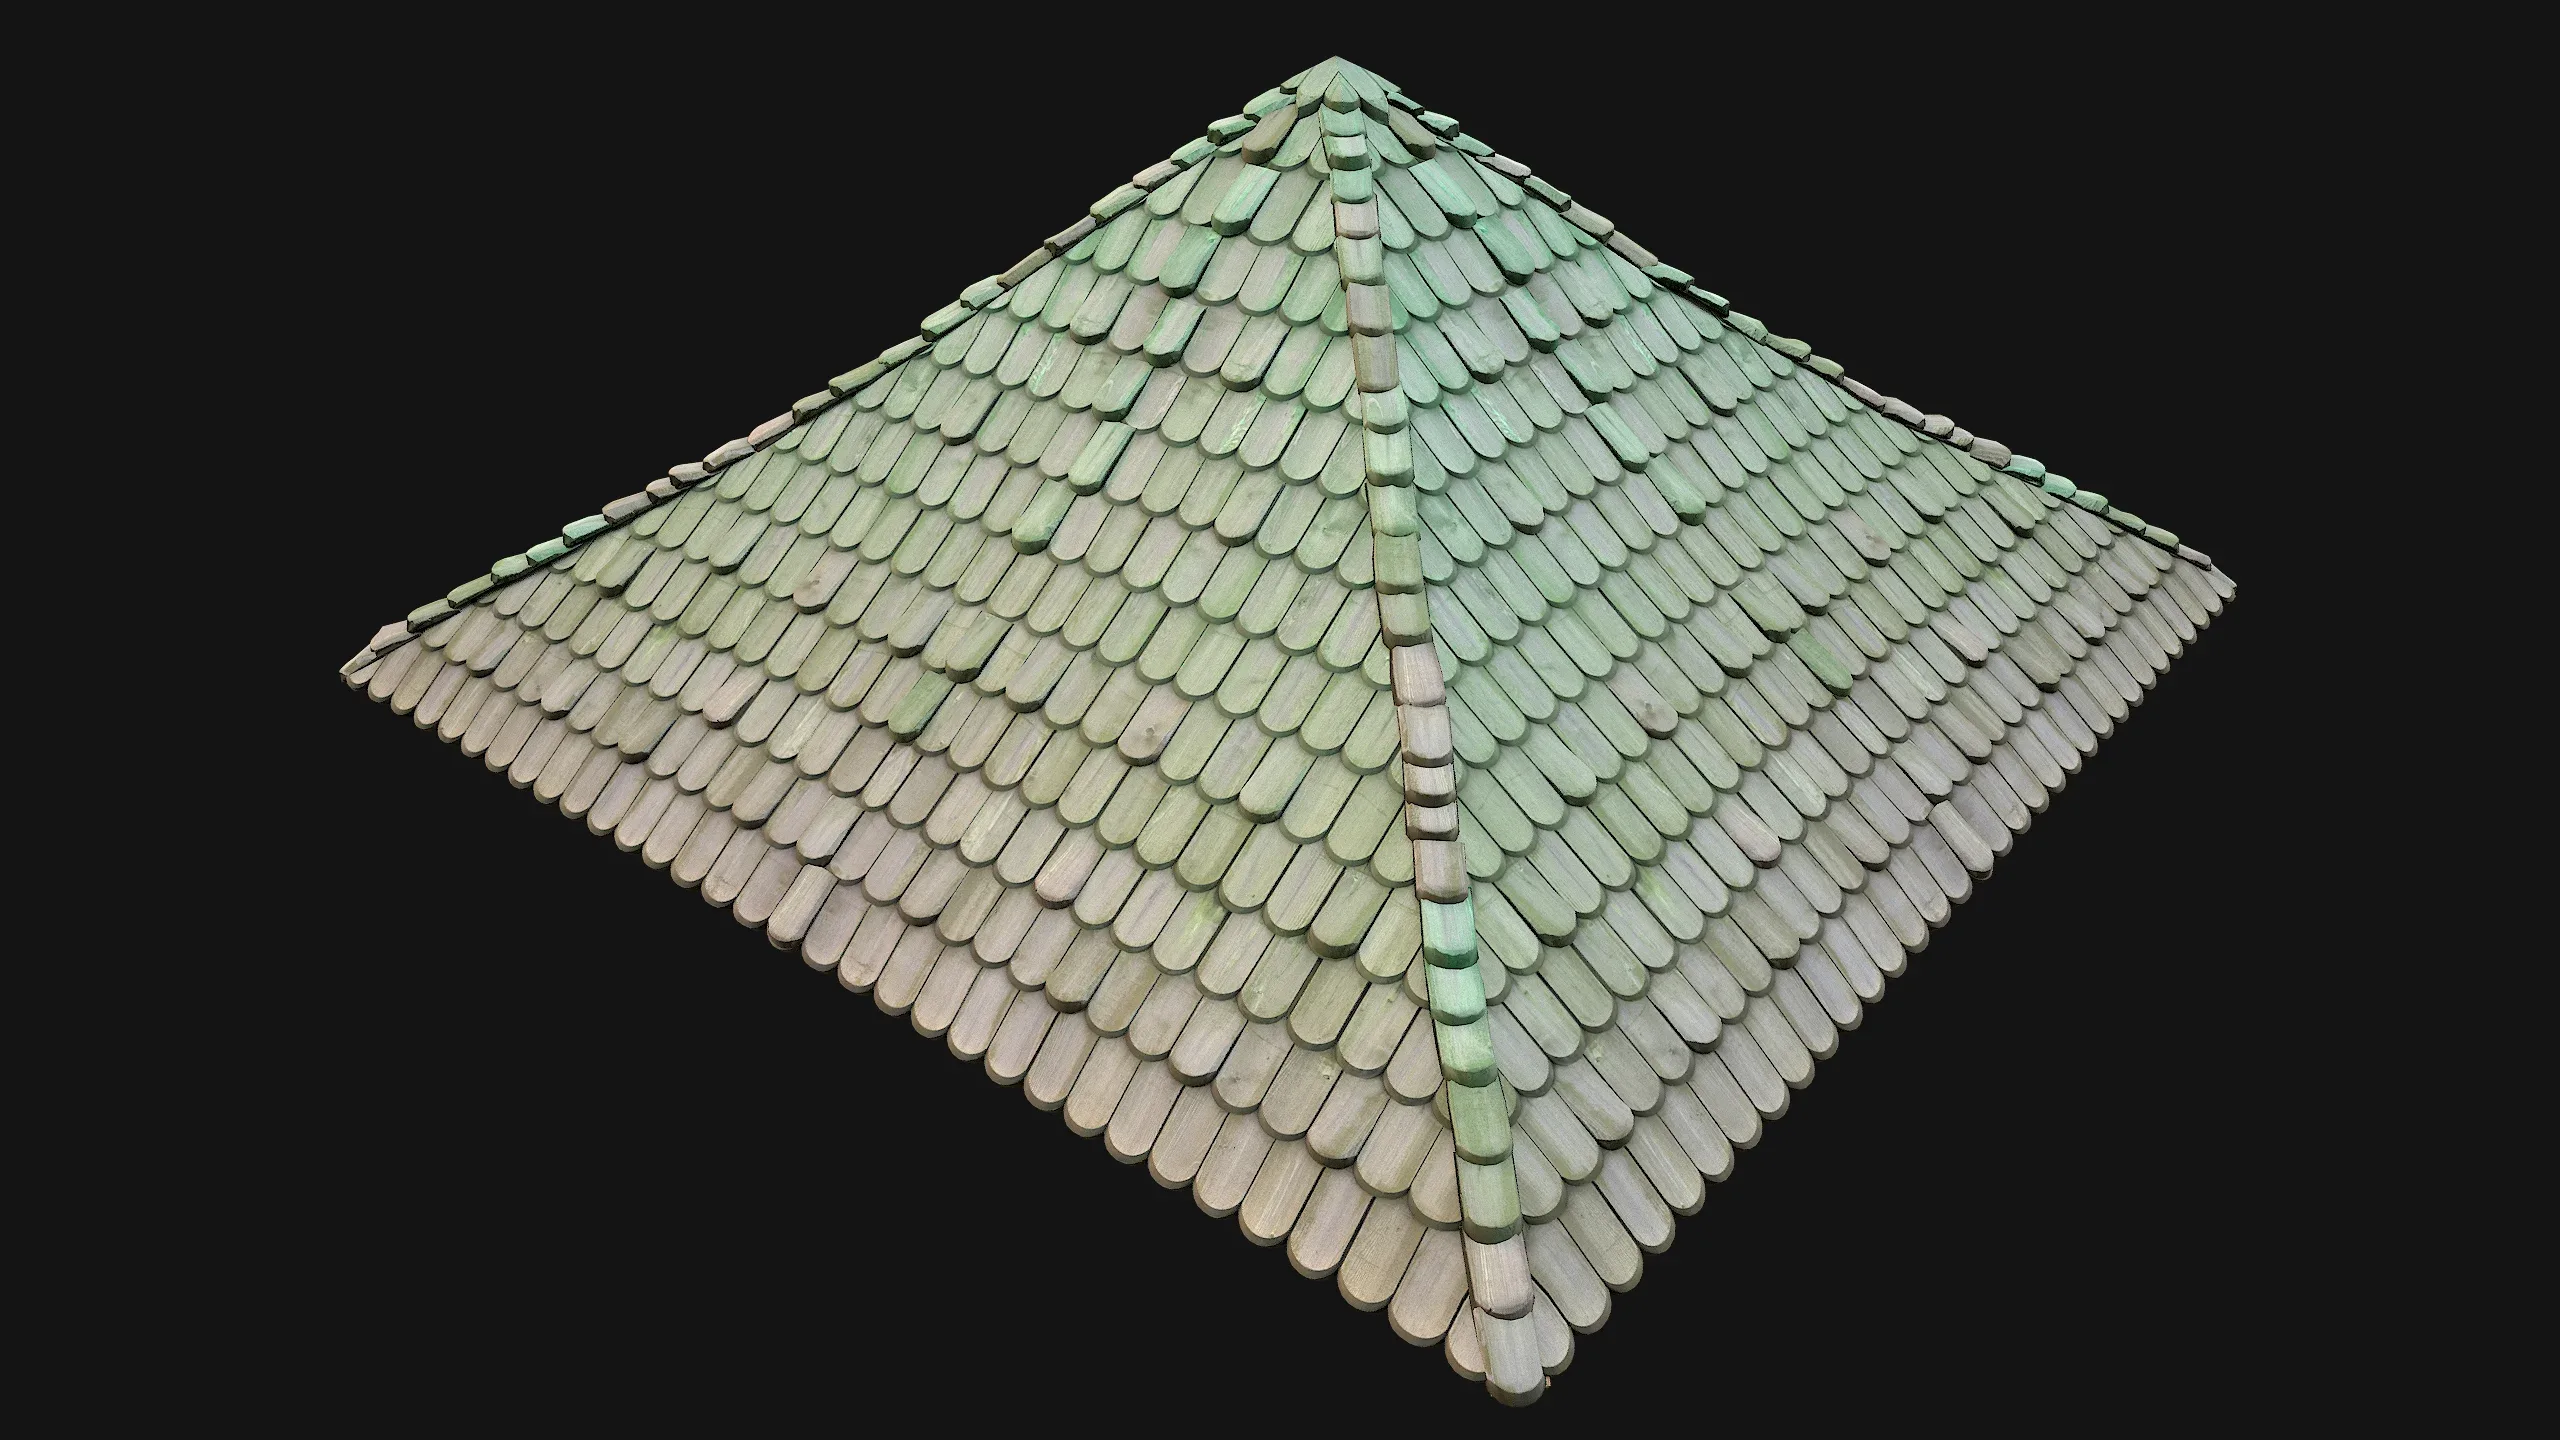 Medieval Tile Pyramid Roof